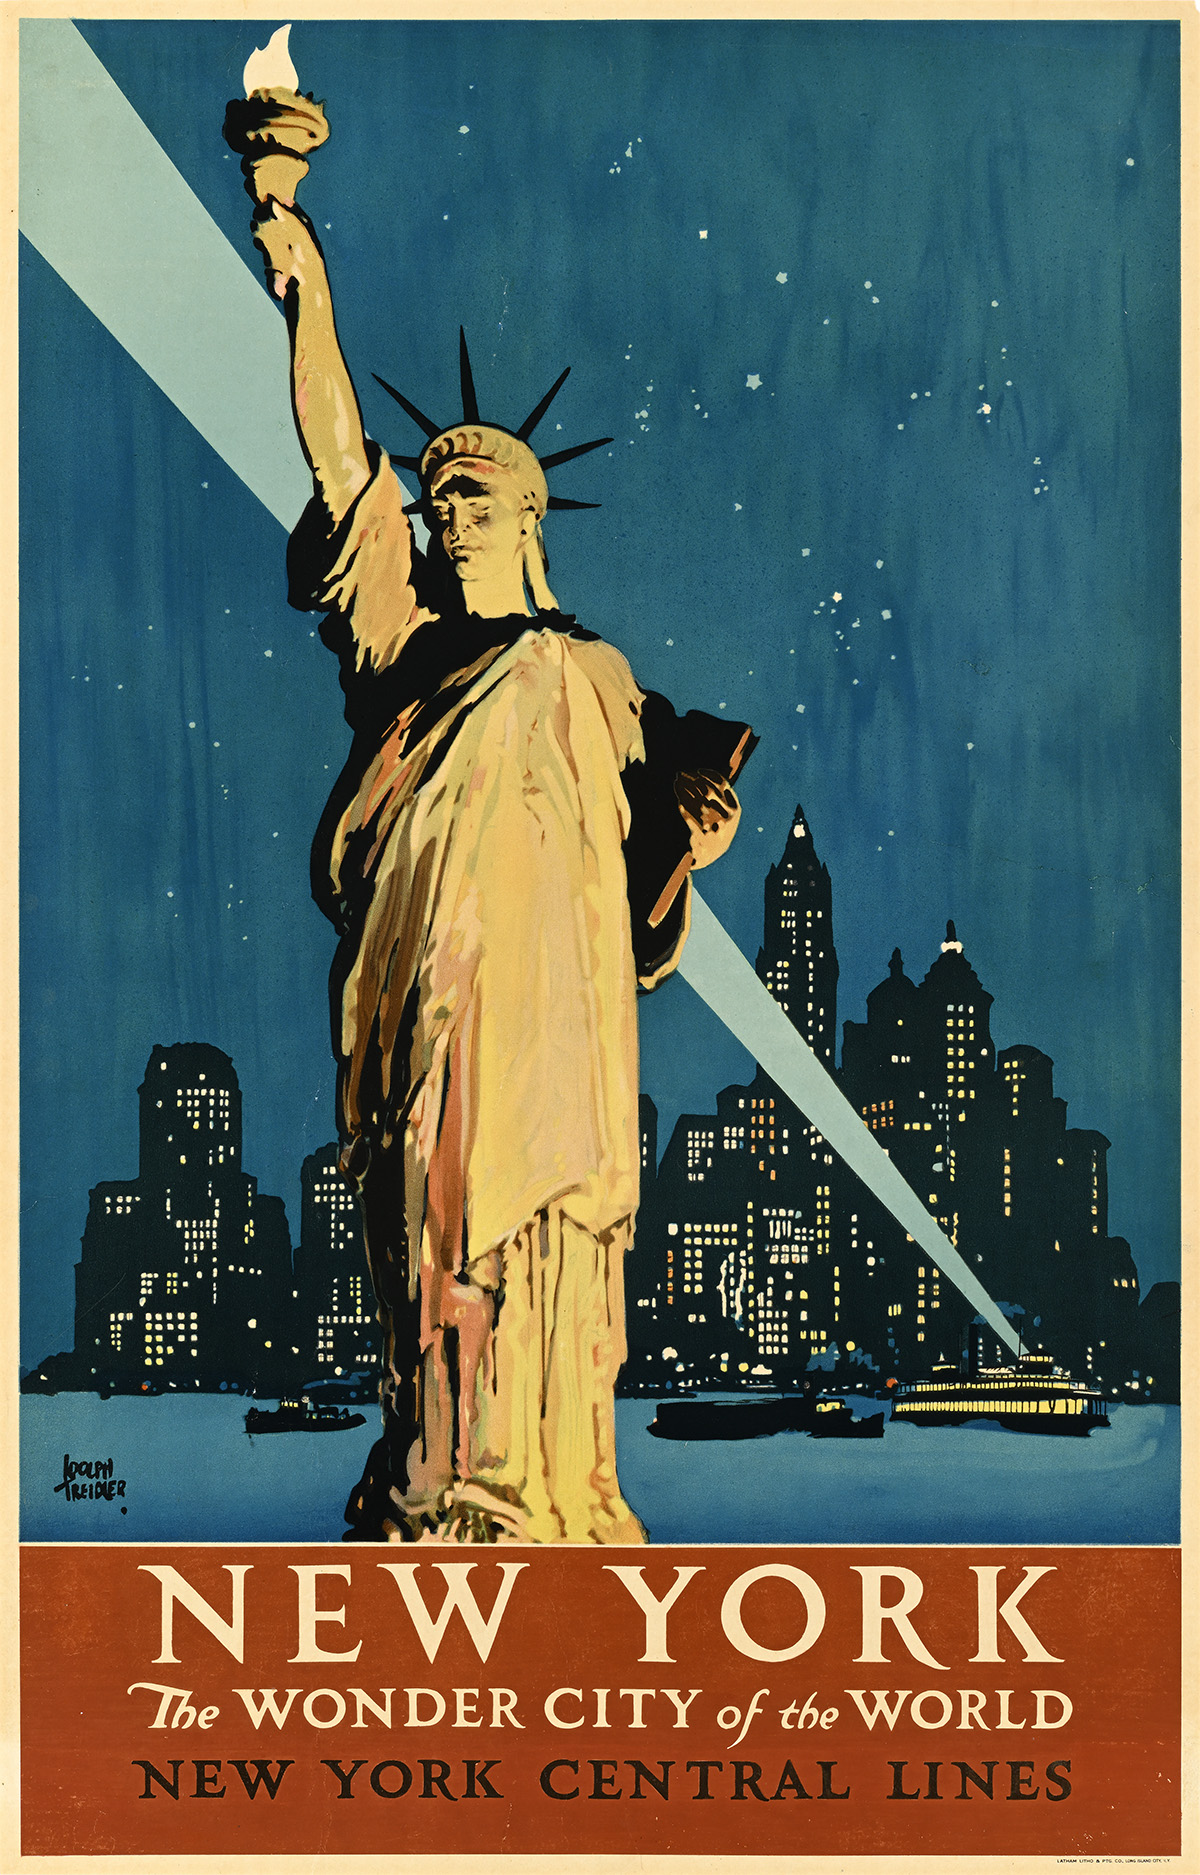 A poster of the Statue of Liberty against a nighttime city skyline with a spotlight behind it.